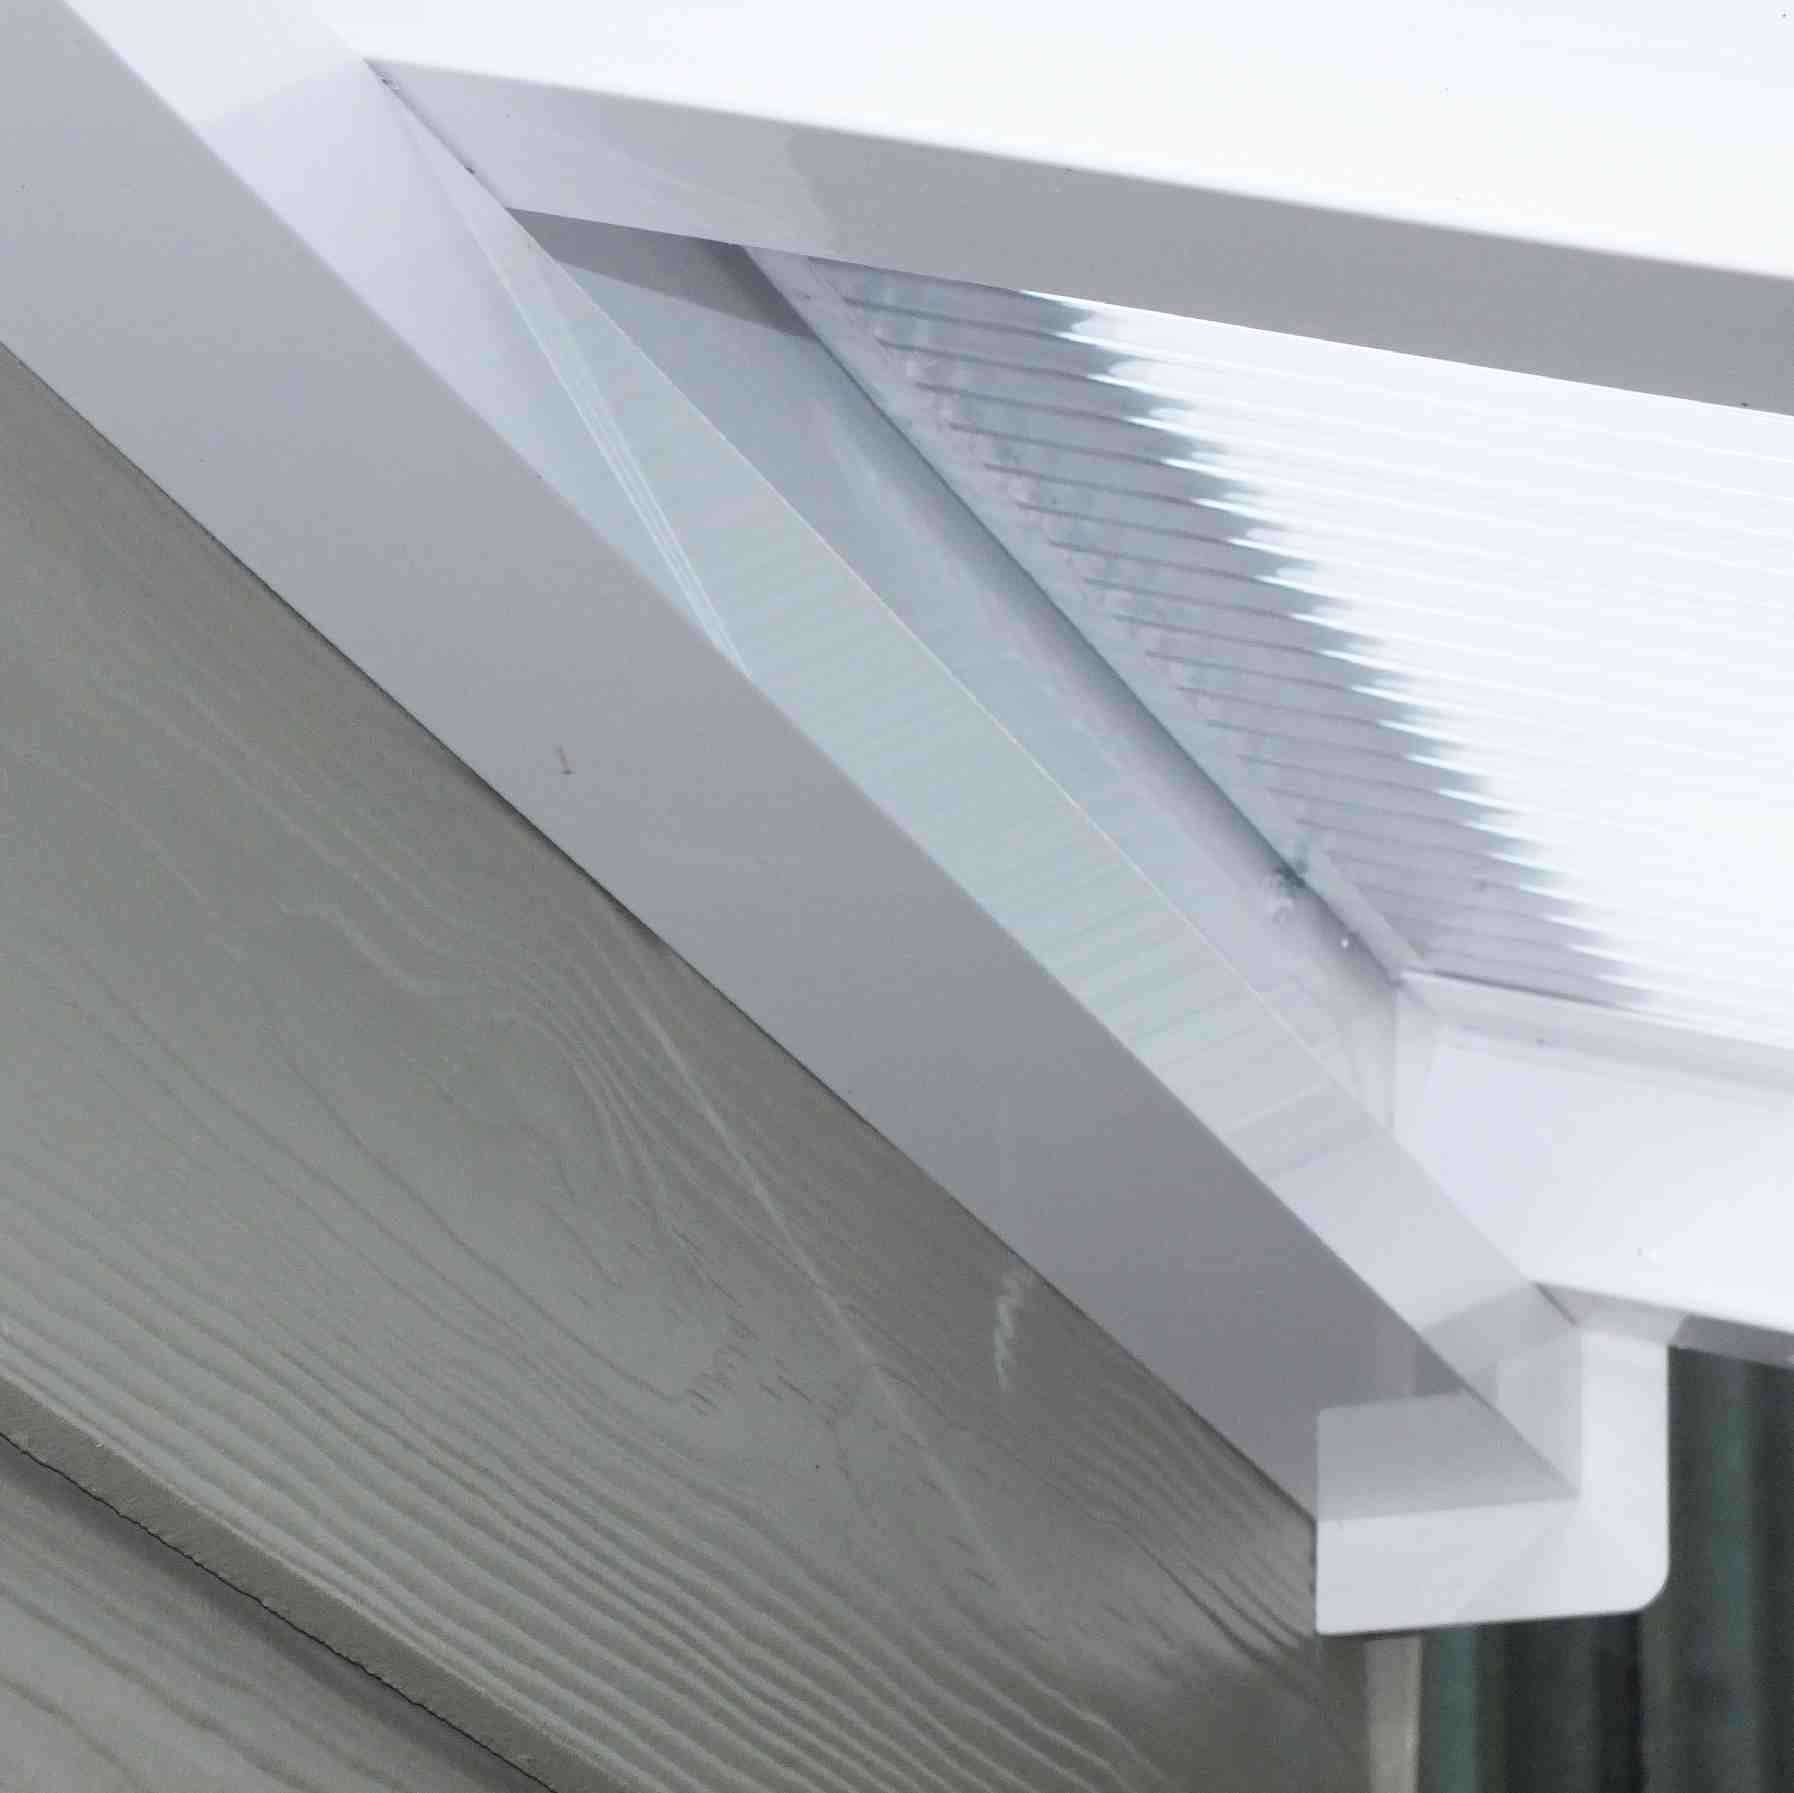 Great deals on Omega Verandah White with 16mm Polycarbonate Glazing - 7.0m (W) x 4.0m (P), (4) Supporting Posts